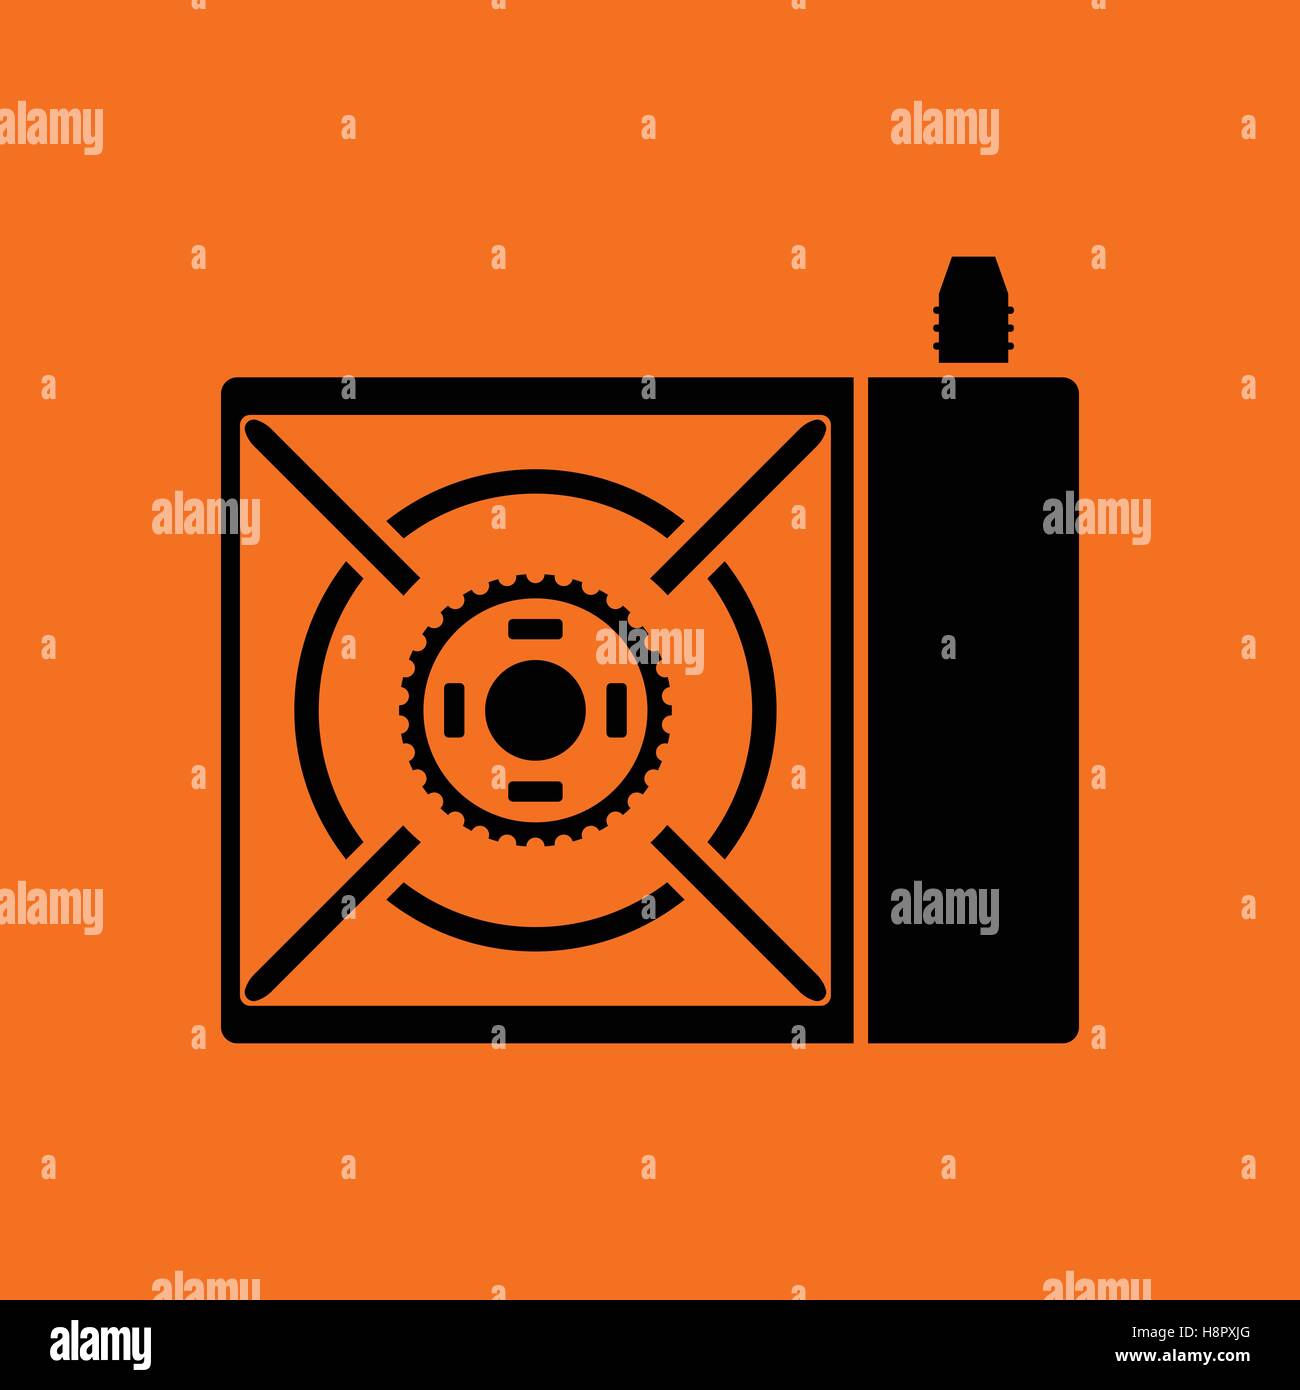 Camping gas burner stove icon. Orange background with black. Vector illustration. Stock Vector